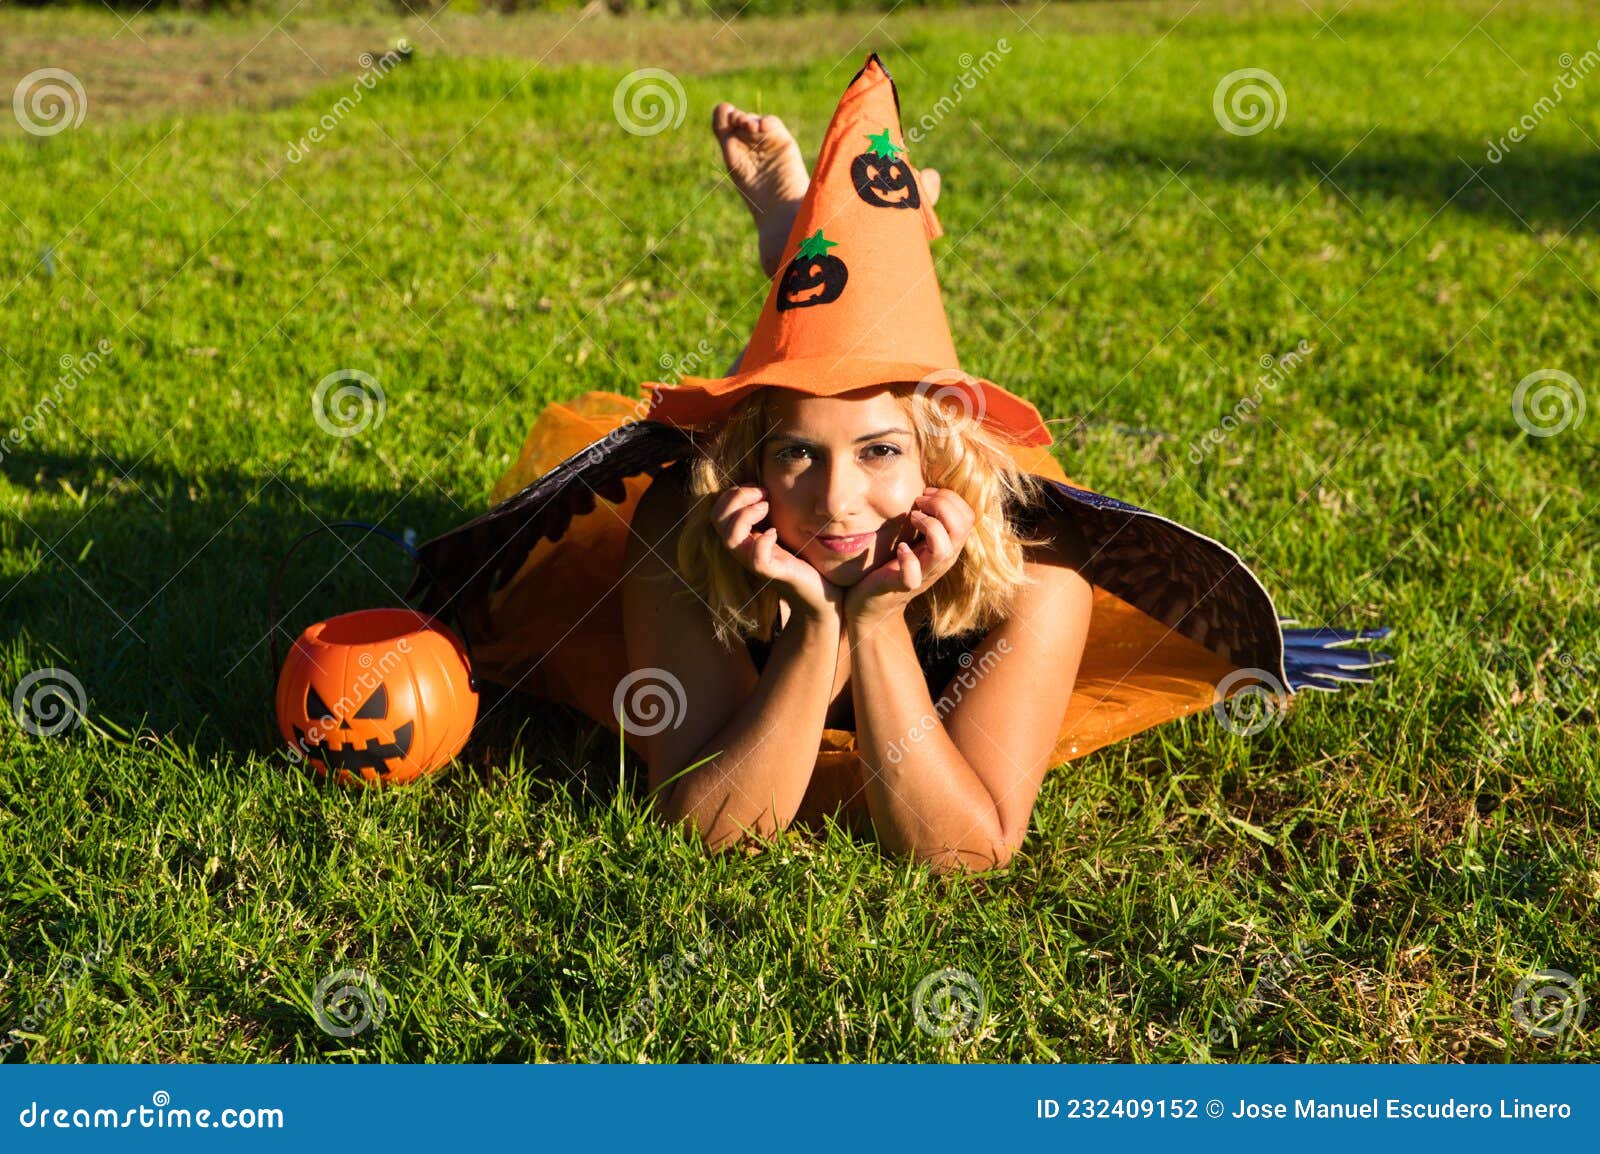 Adult Woman With Blonde Hair And A Bit Chubby In The Park Enjoying The Halloween Party The 